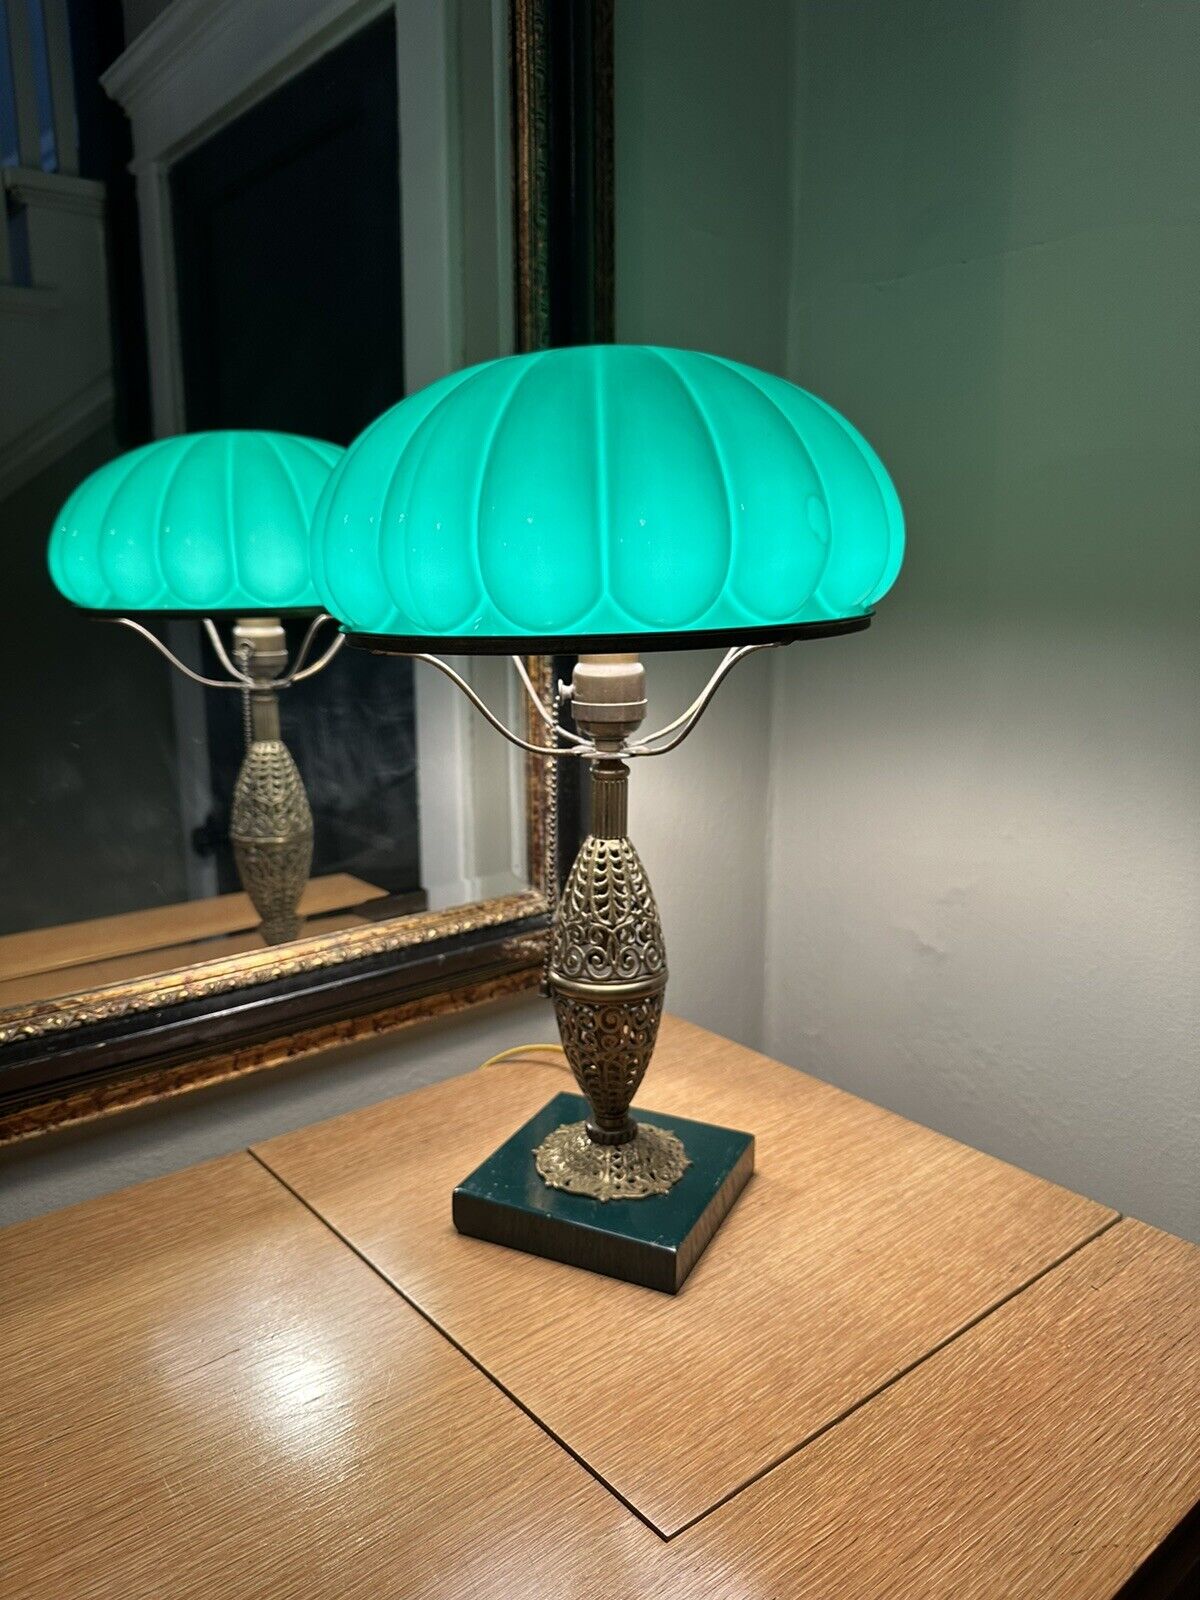 Antique 1910s Green Cased Glass Mushroom Dome Table Lamp Emeralite Style Shade